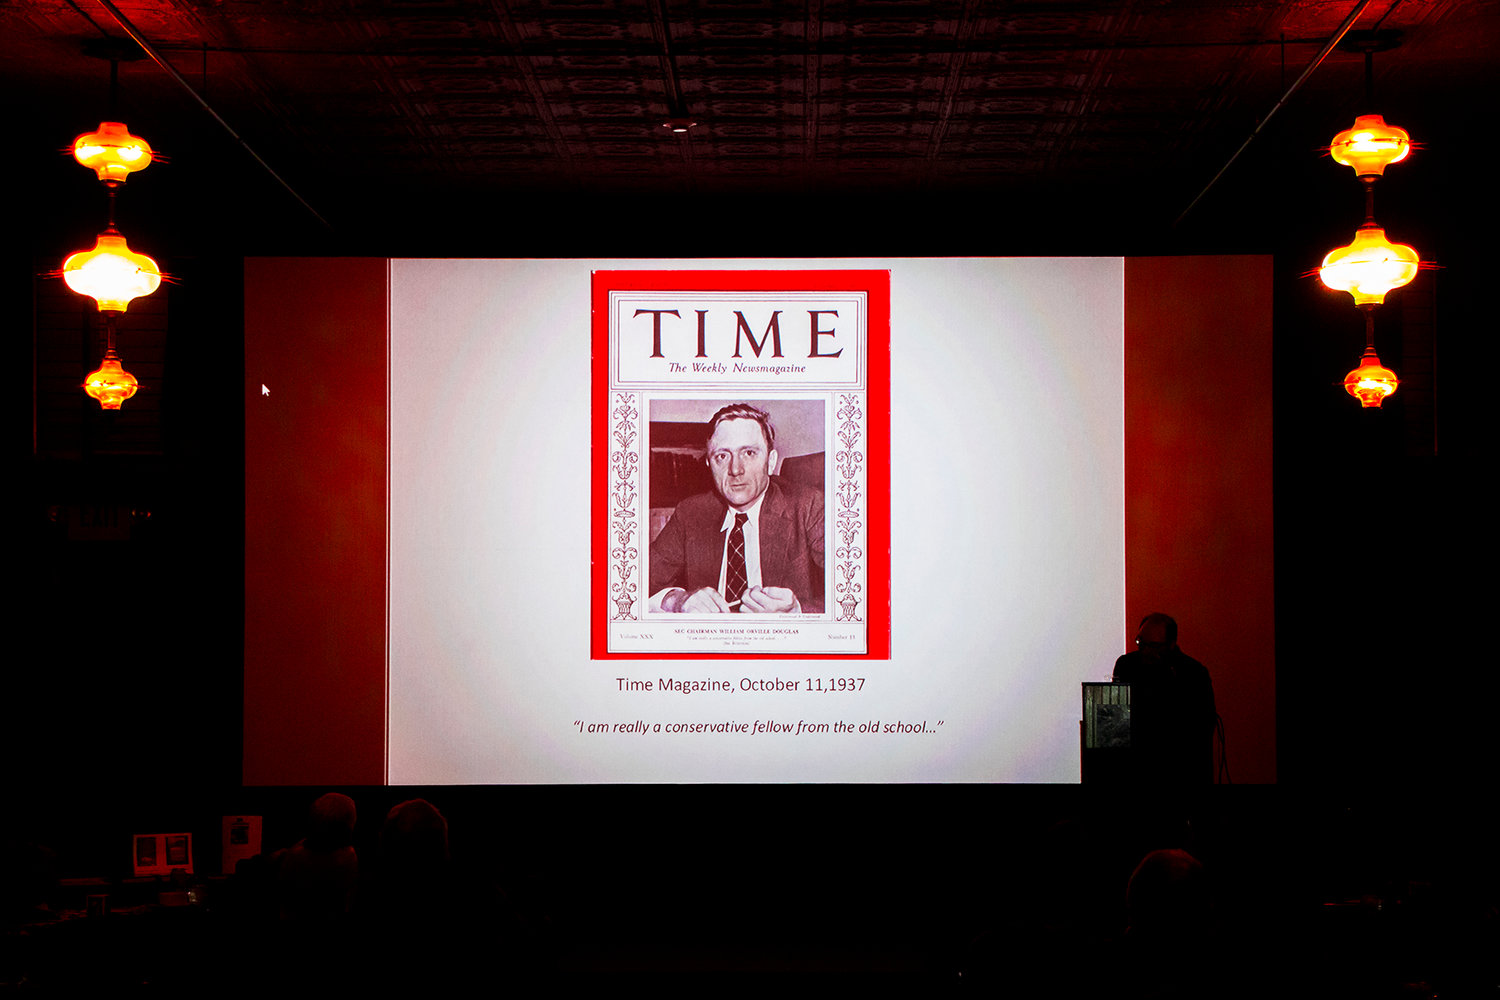 A Time Magazine cover is displayed showing late Associate Justice of the Supreme Court, William O. Douglas, as John Concillo talks about his life Wednesday night at the Olympic Club Theater room in Centralia.